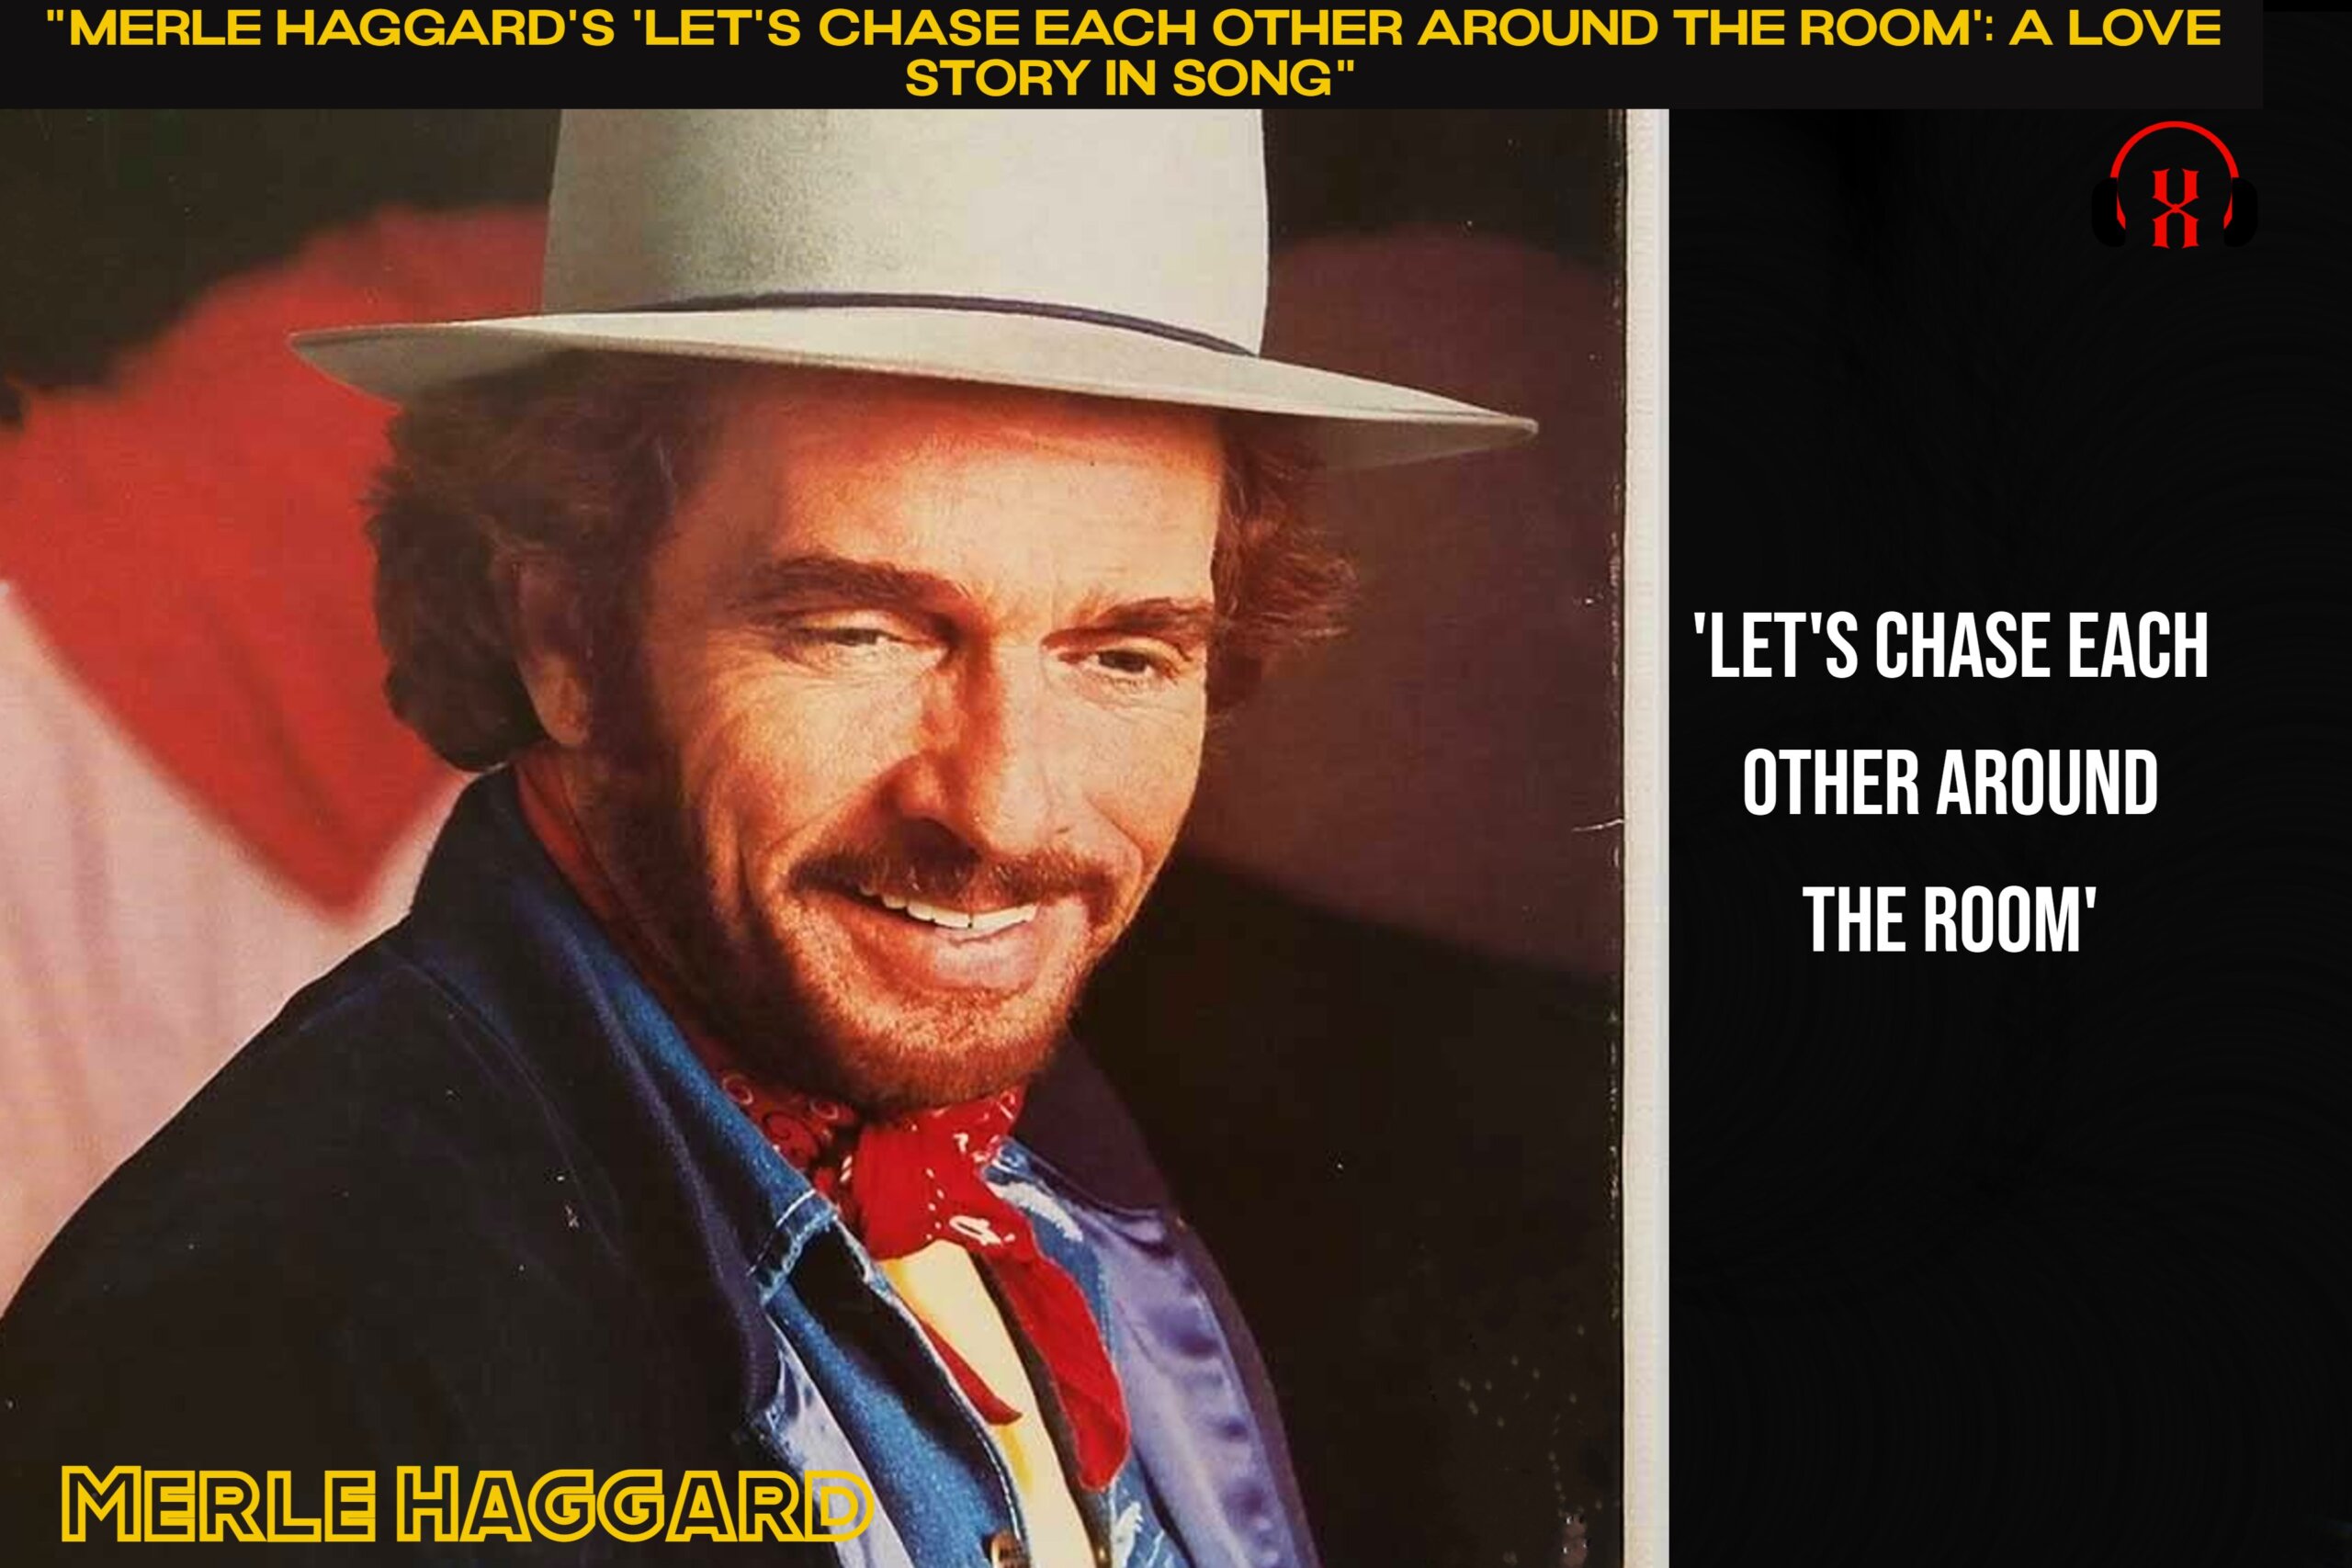 “Merle Haggard’s ‘Let’s Chase Each Other Around The Room’: A Love Story in Song”